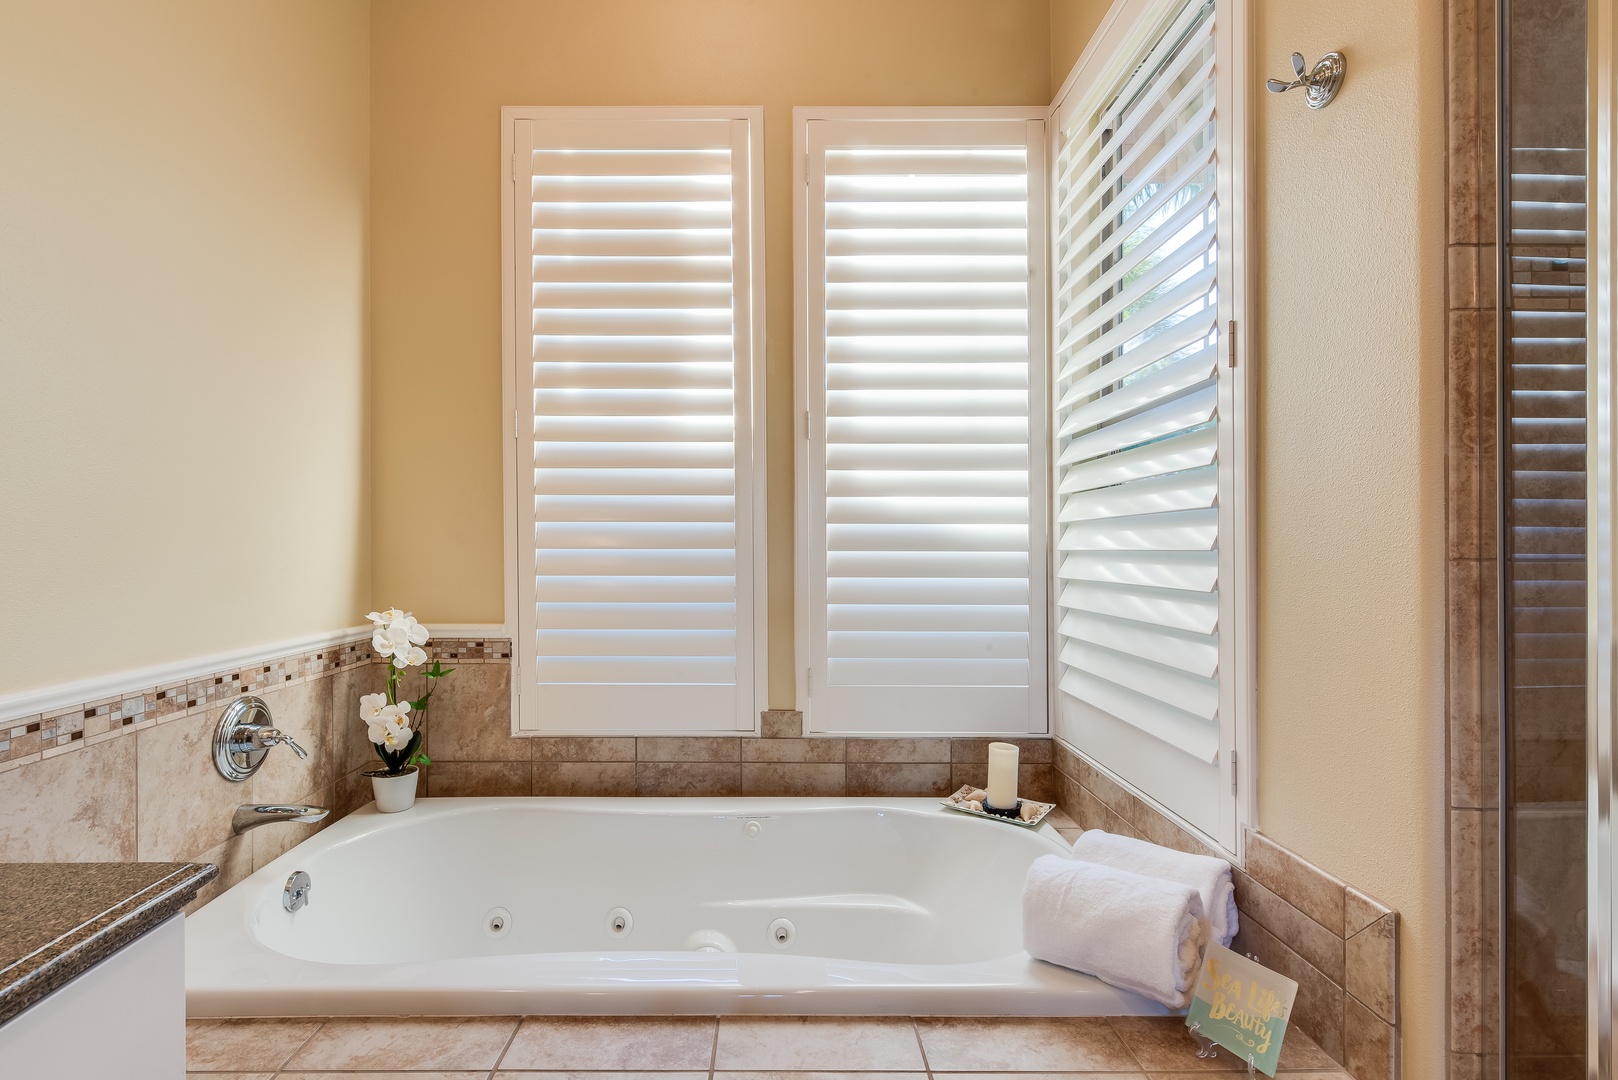 Kamuela Vacation Rentals, Kulalani 1701 at Mauna Lani - Luxurious Jacuzzi Tub in Downstairs Ensuite is the right place to be after a day of exploring